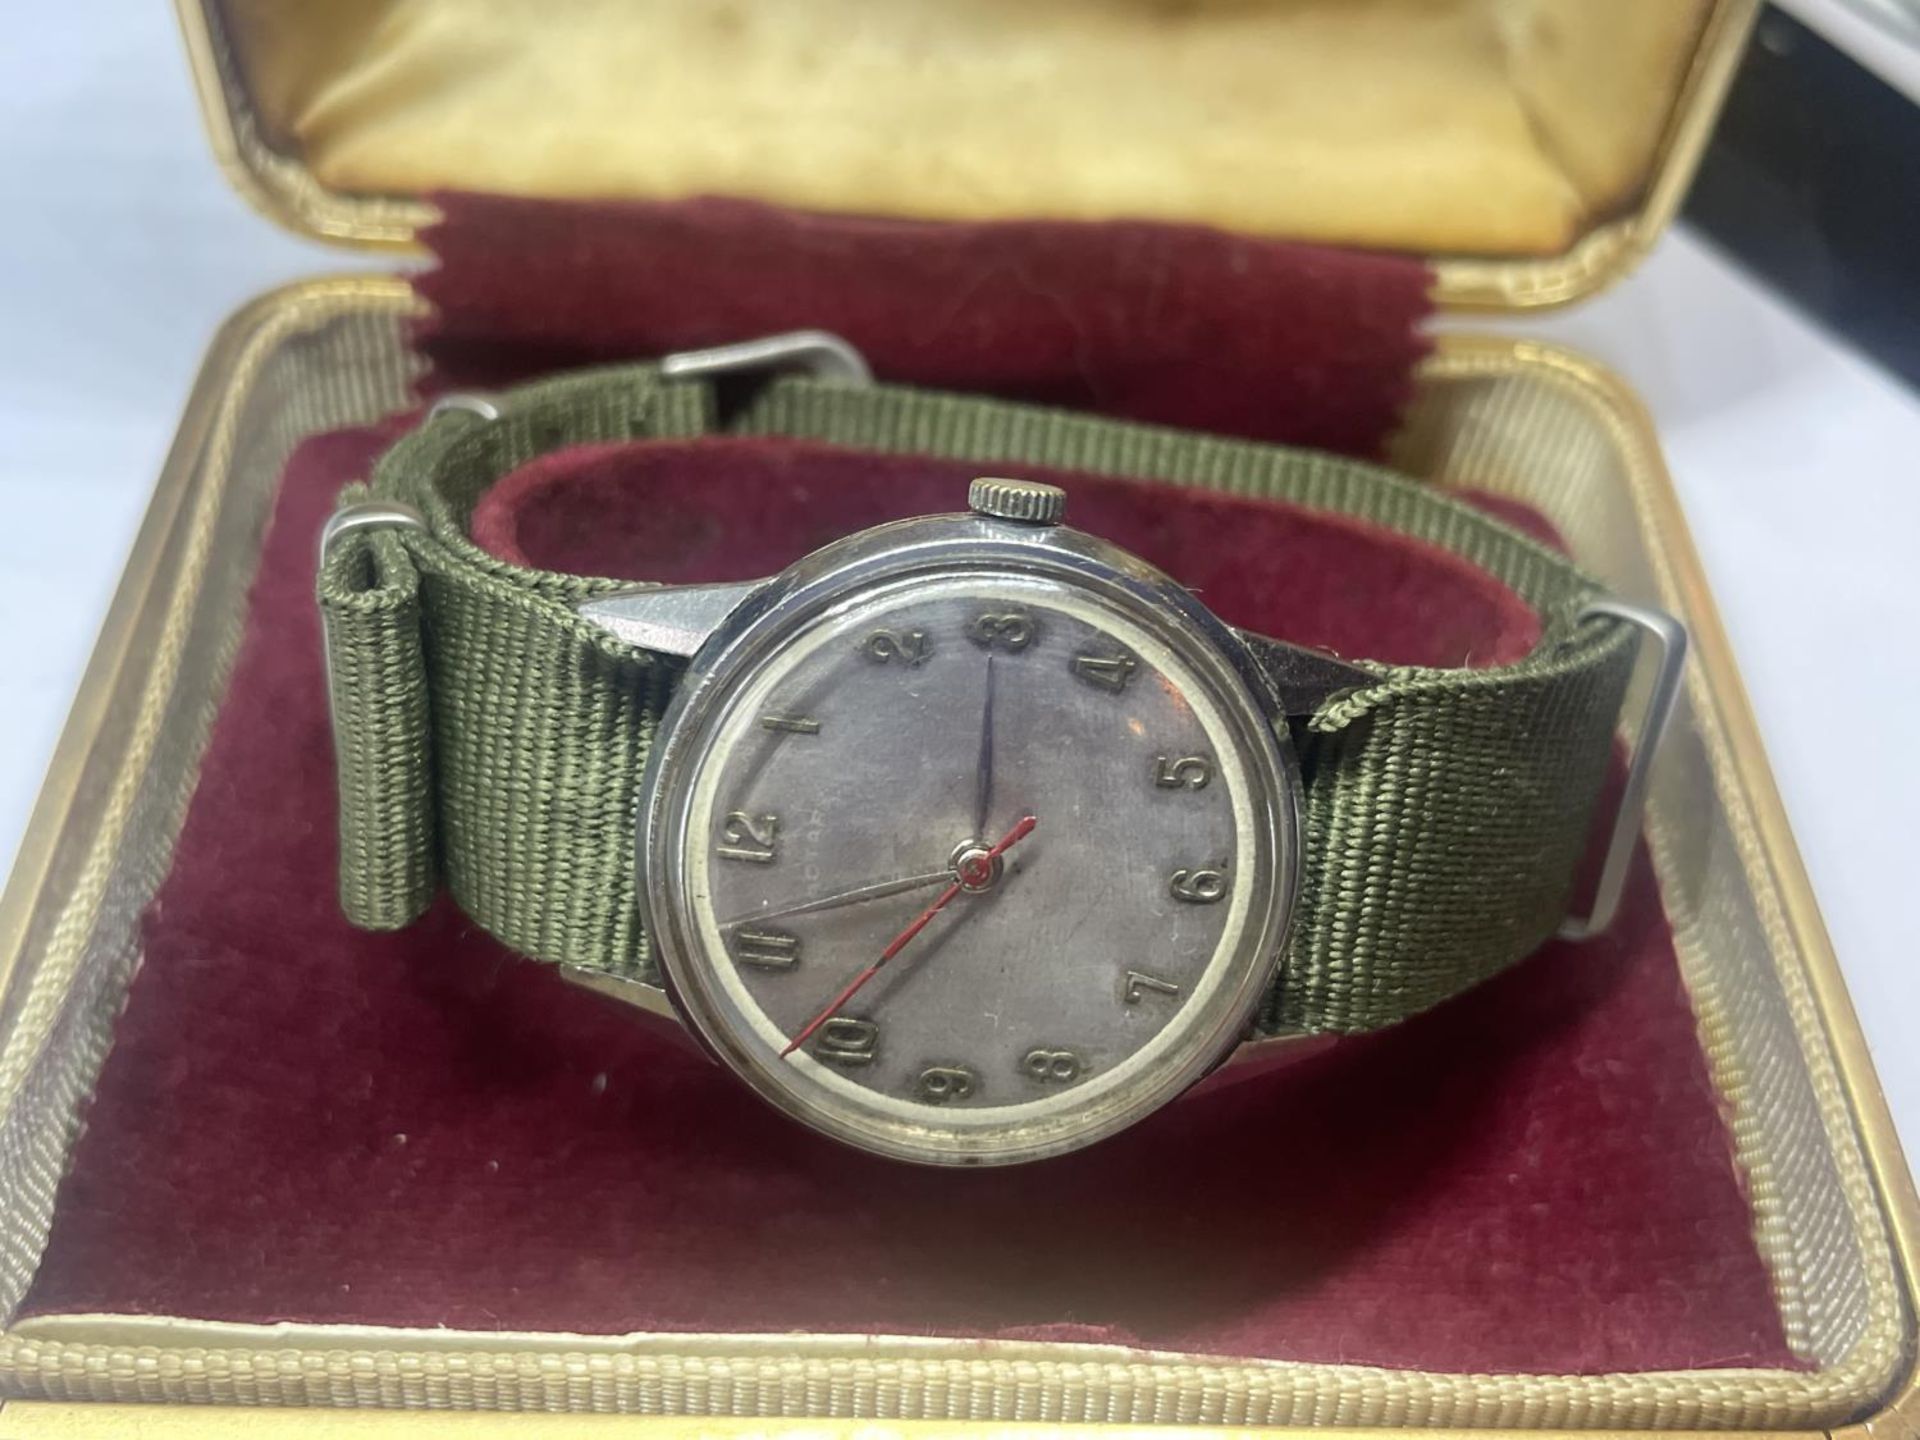 A VINTAGE STANEX MECHANICAL WRIST WATCH SEEN WORKING BUT NO WARRANTY - Image 3 of 3